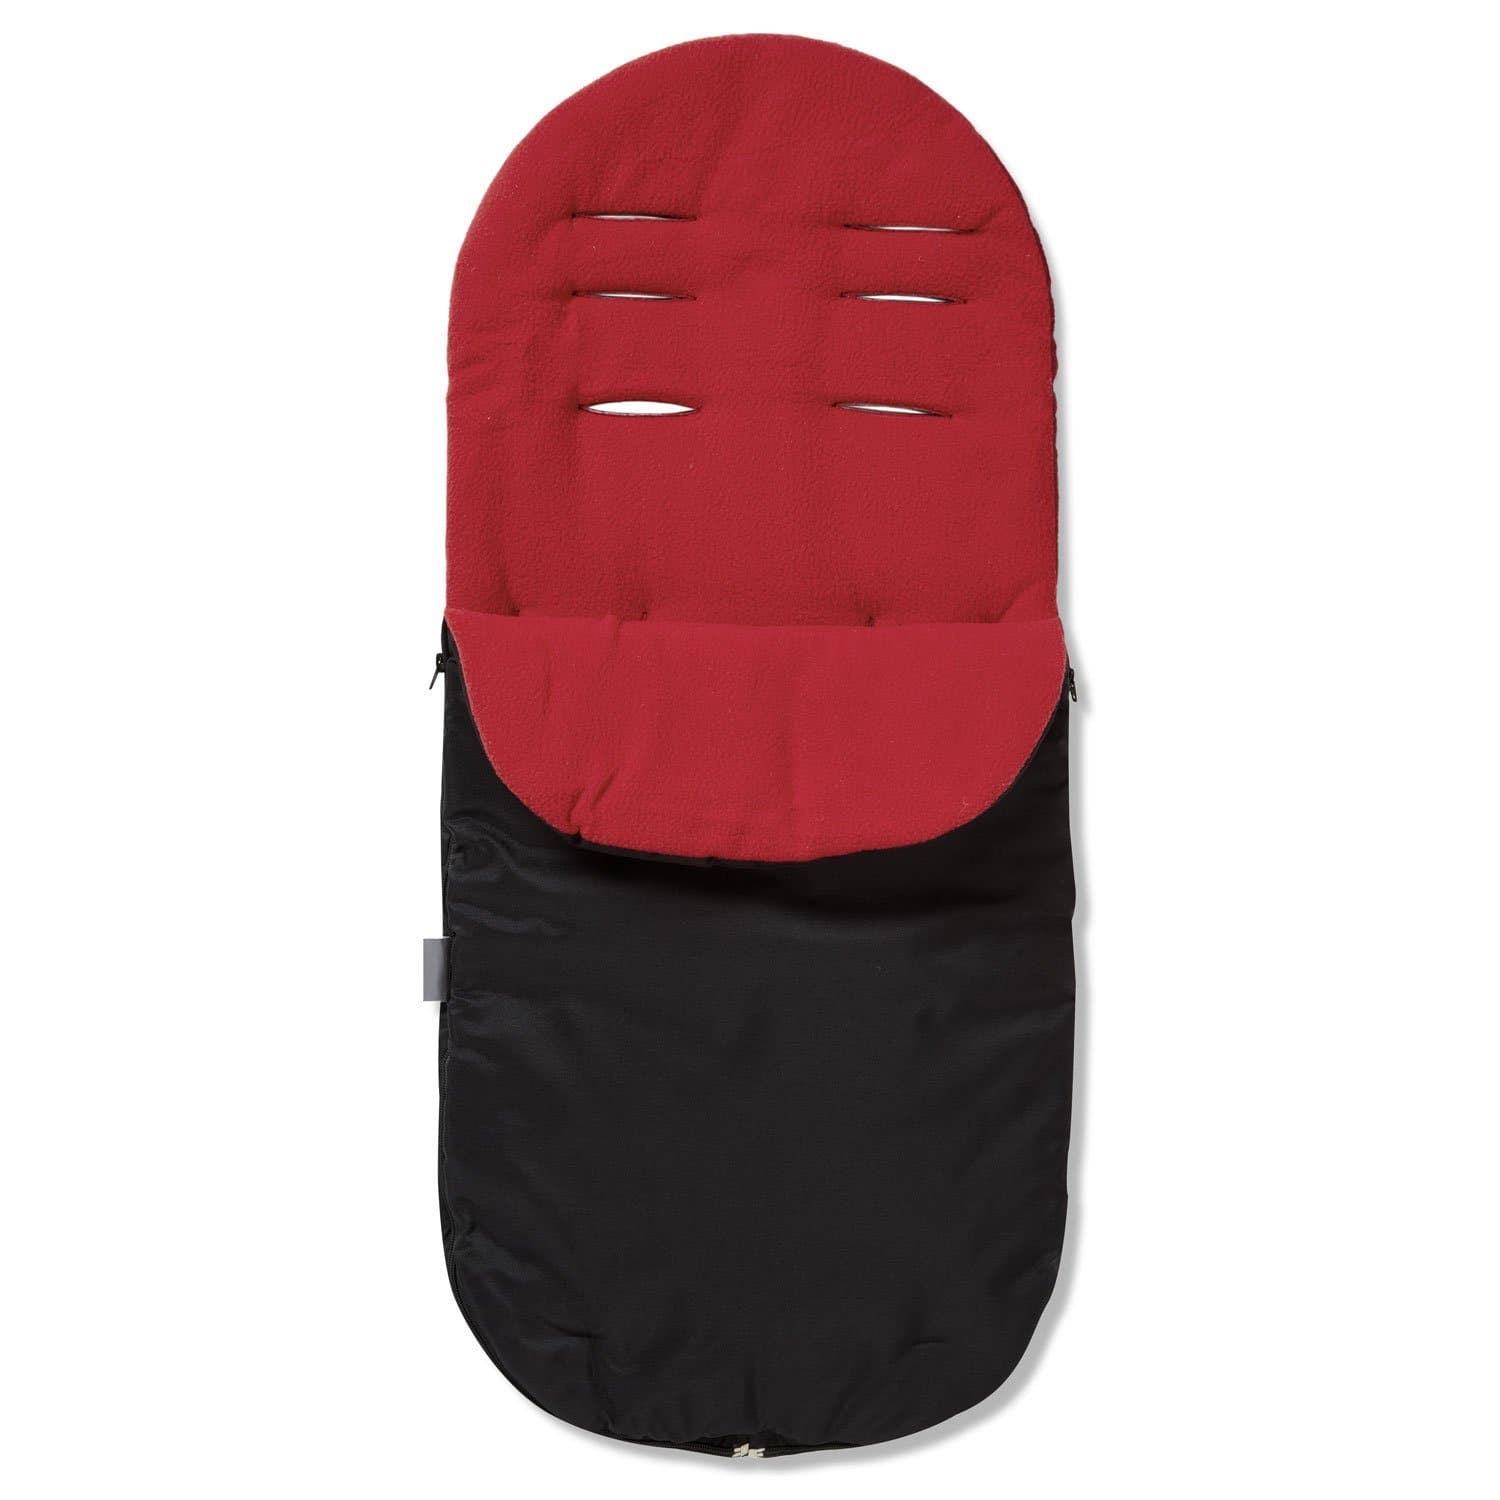 Footmuff / Cosy Toes Compatible with Koelstra - Red / Fits All Models | For Your Little One